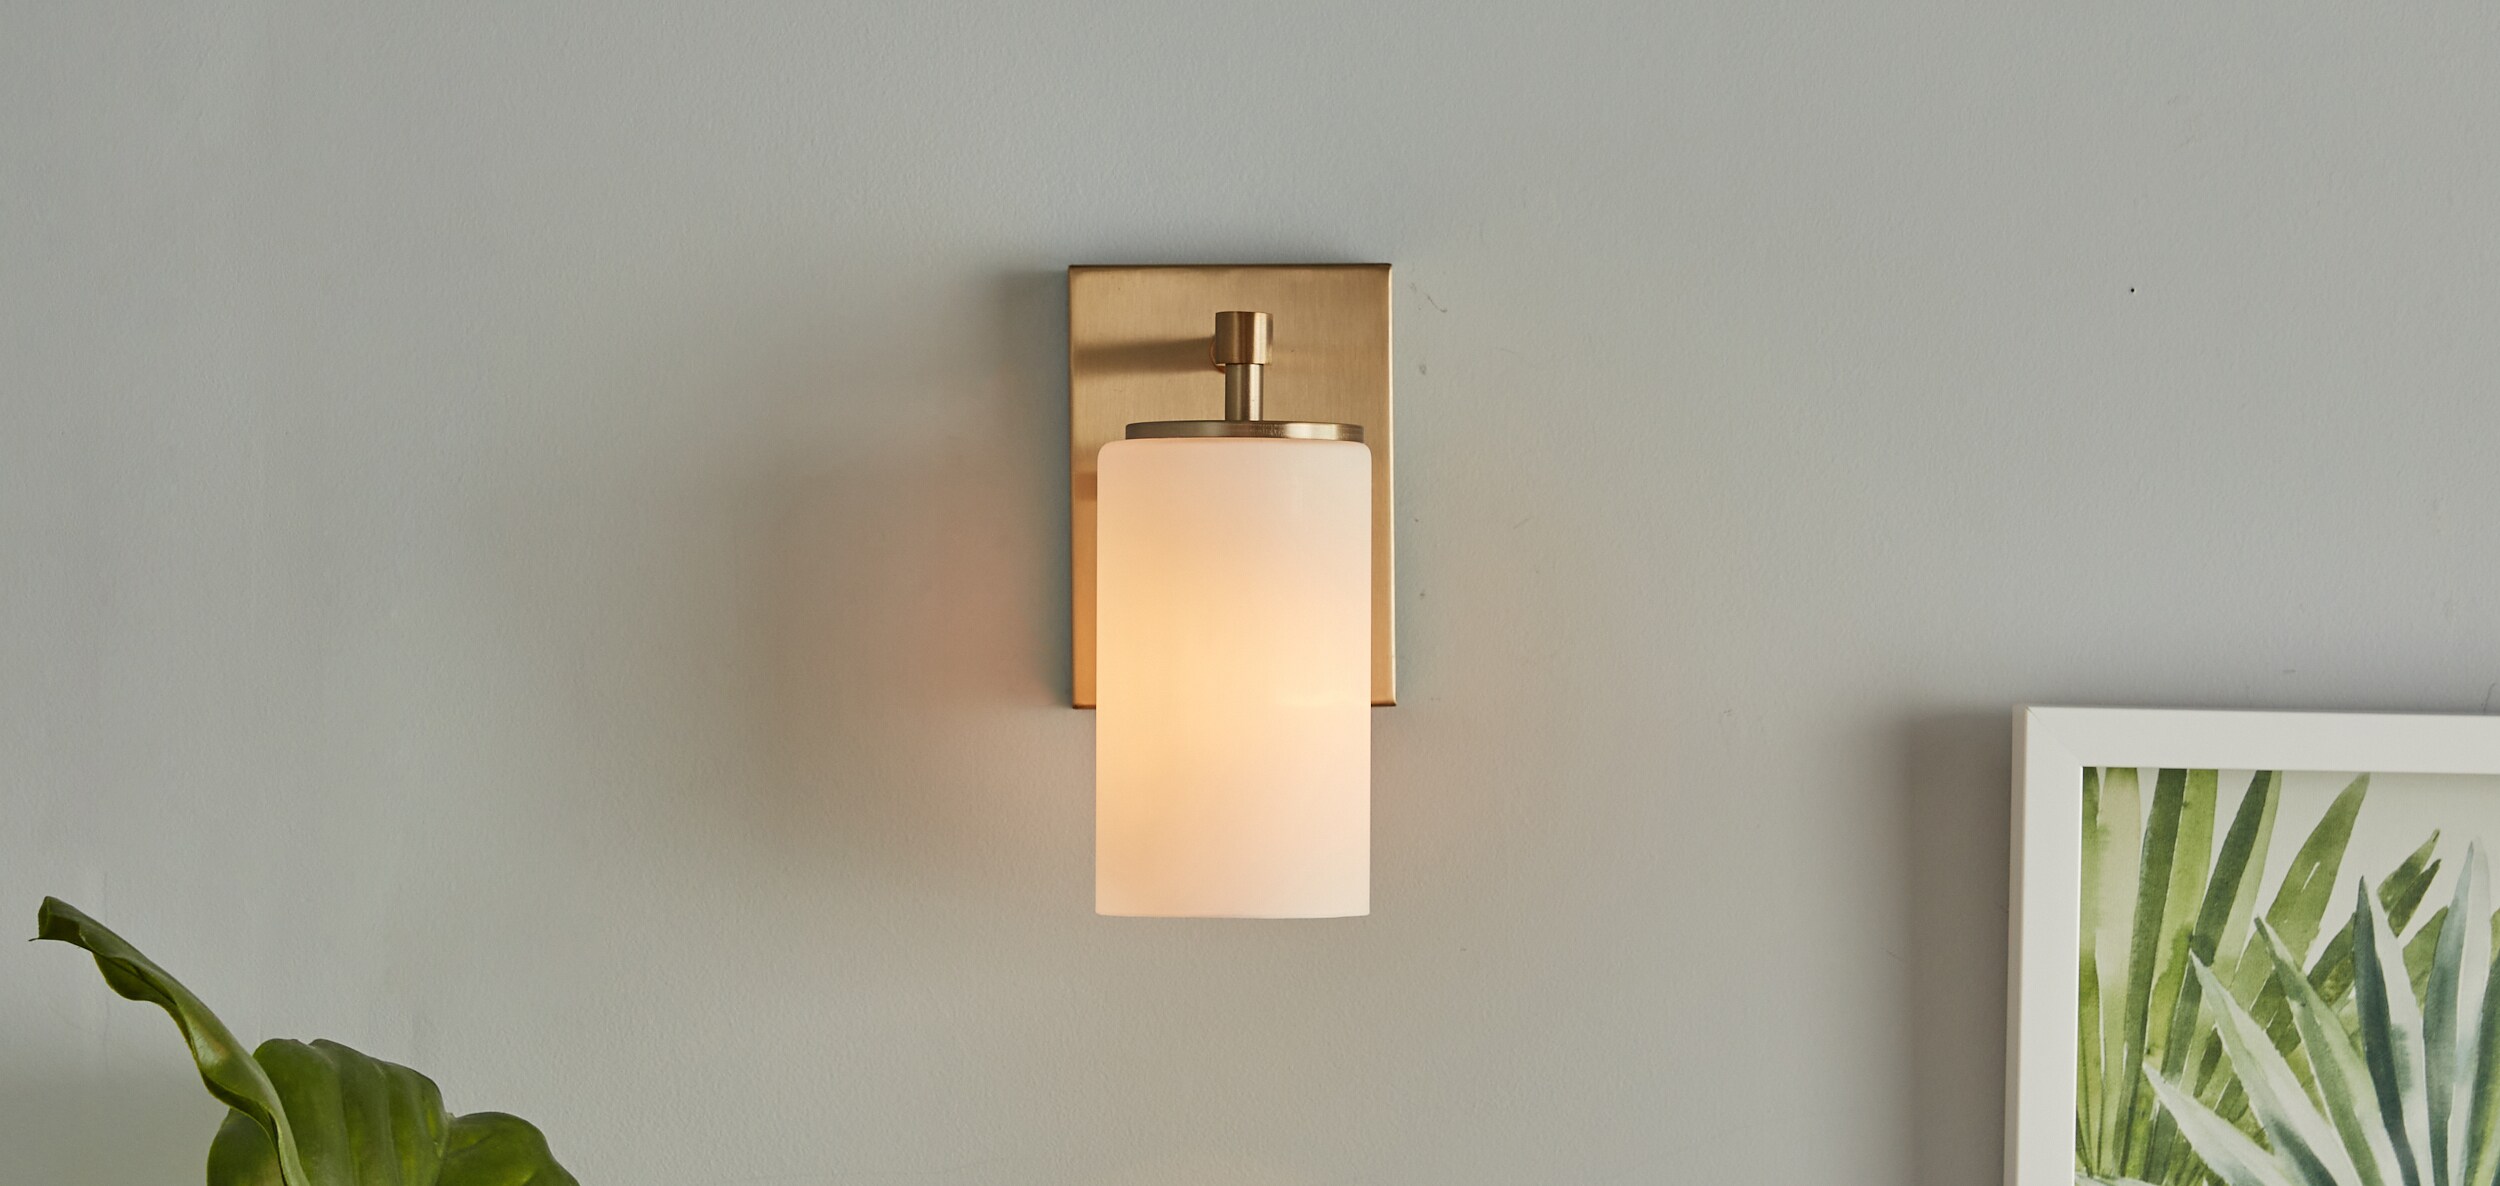 Sea Gull Lighting Wall Sconces at Lowes.com